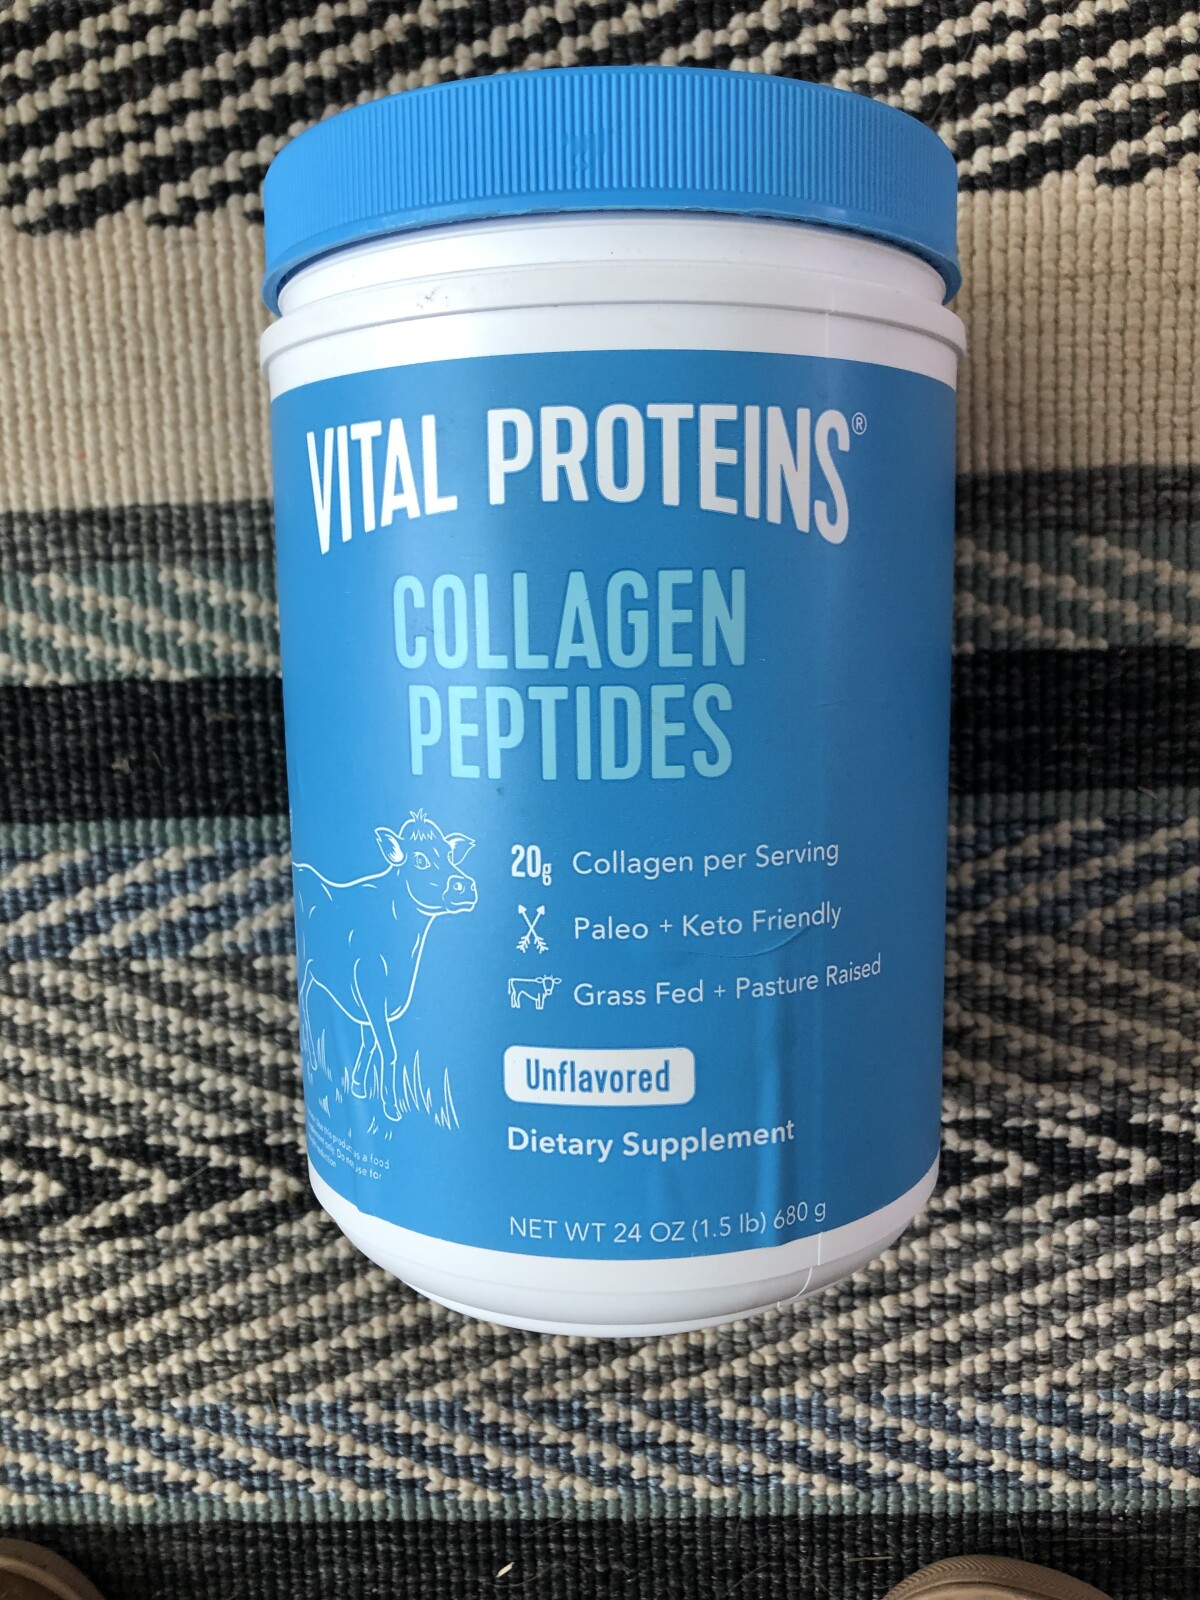 A Word About Protein Powders